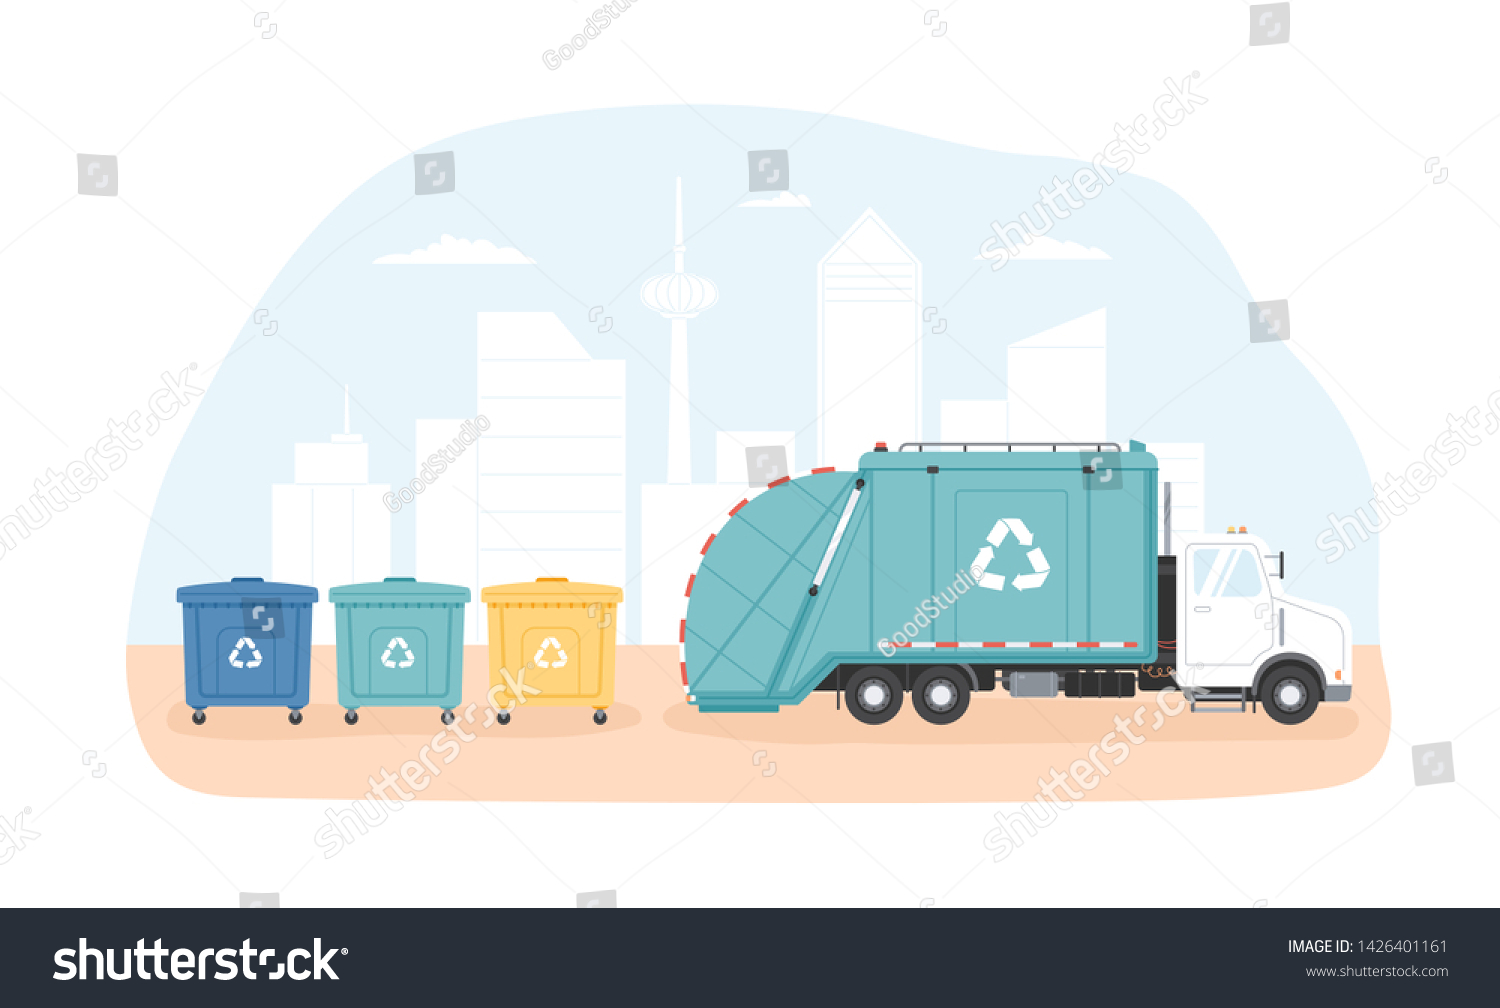 SVG of Municipal dumpsters and waste collection vehicle or garbage truck collecting trash against modern cityscape in background. Junk sorting and recycling. Modern flat cartoon colorful vector illustration. svg